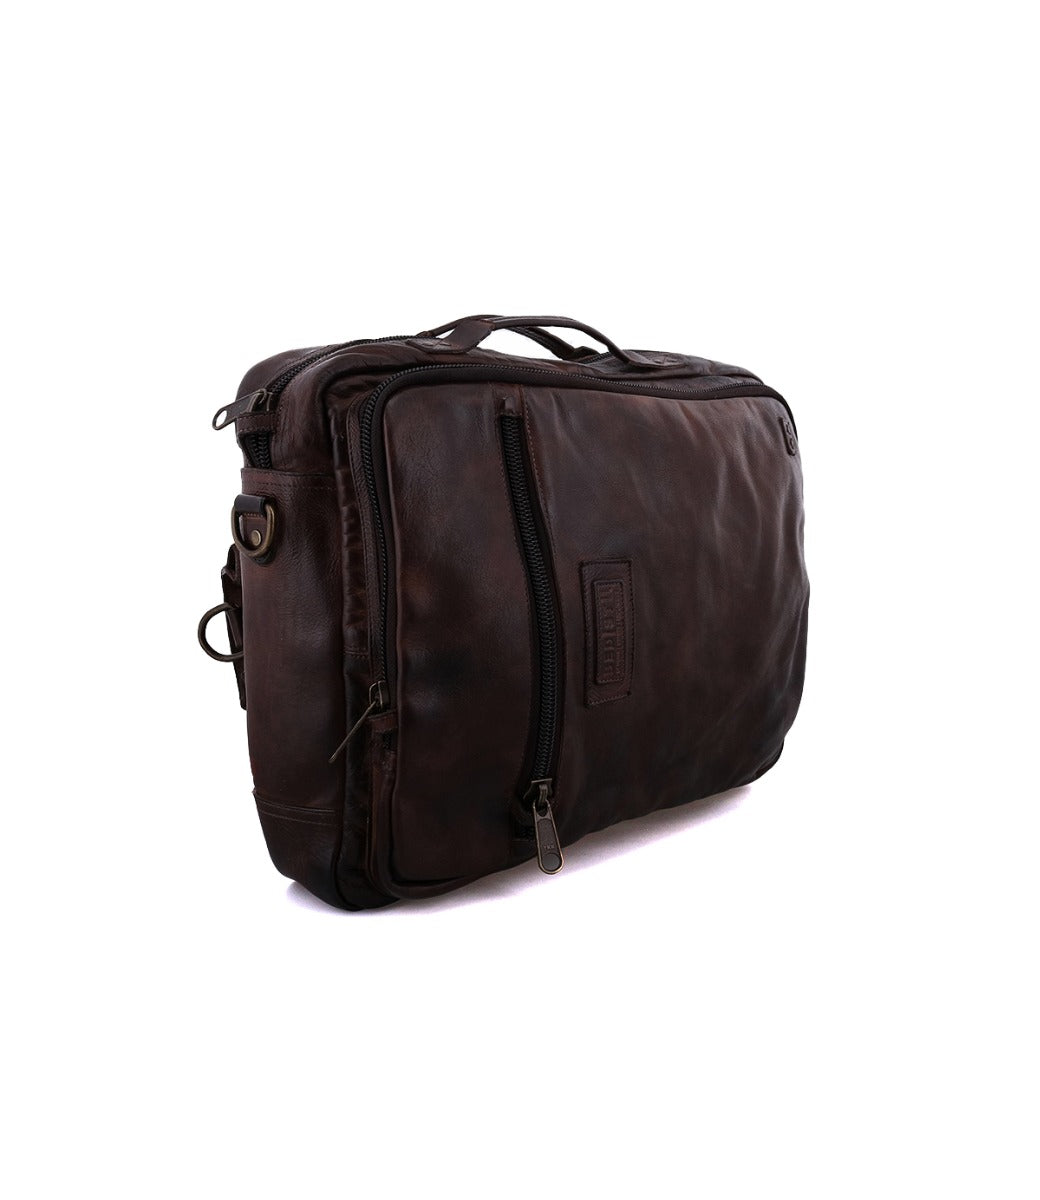 A brown leather Socrates laptop bag on a white background by Bed Stu.